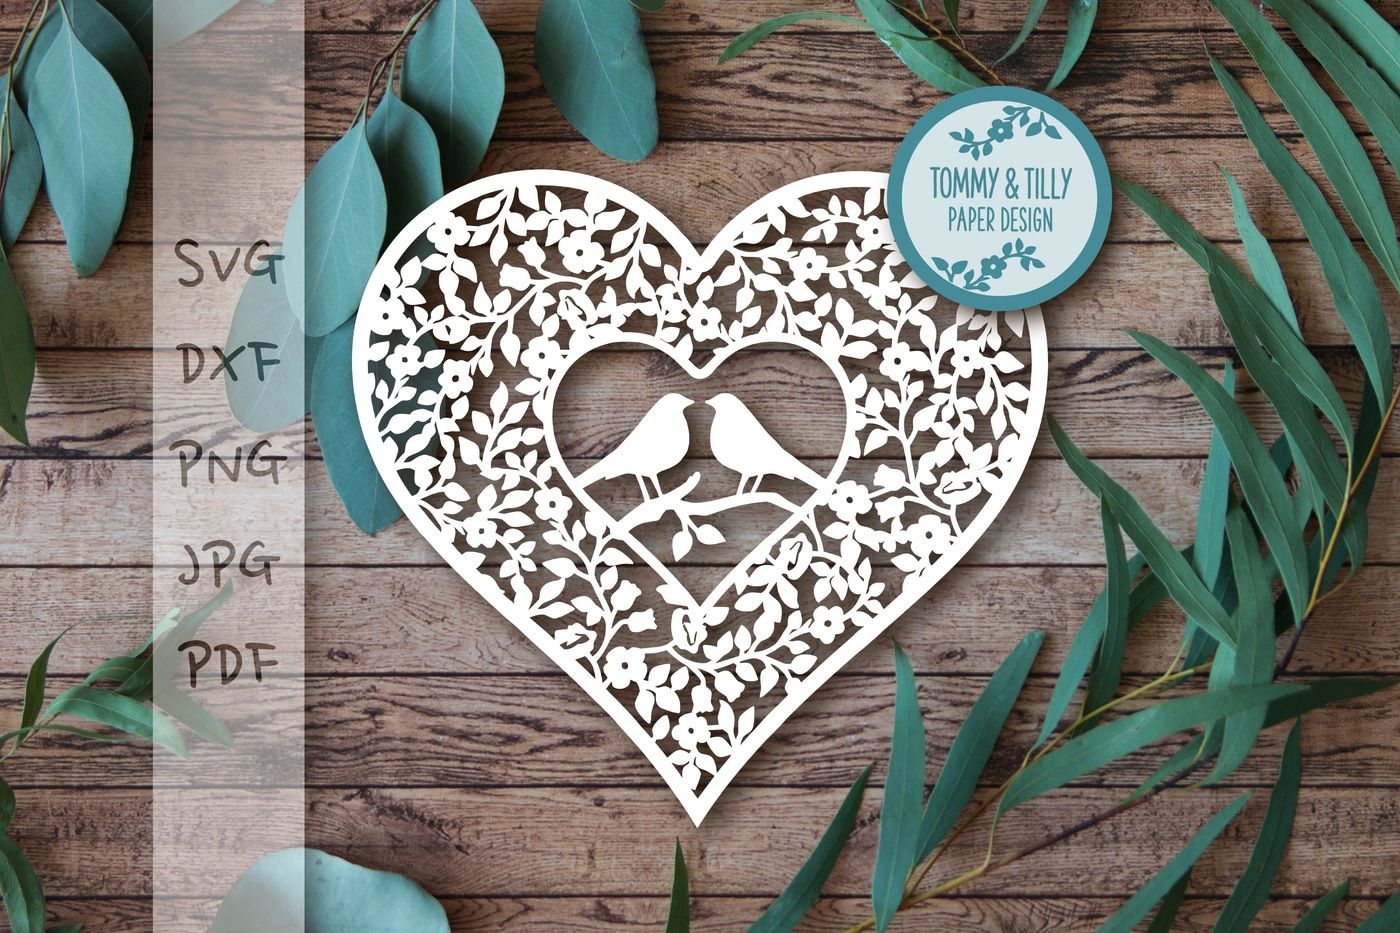 Download Love Bird Vintage Heart Svg Dxf Png Pdf Jpg By Tommy And Tilly Design Thehungryjpeg Com